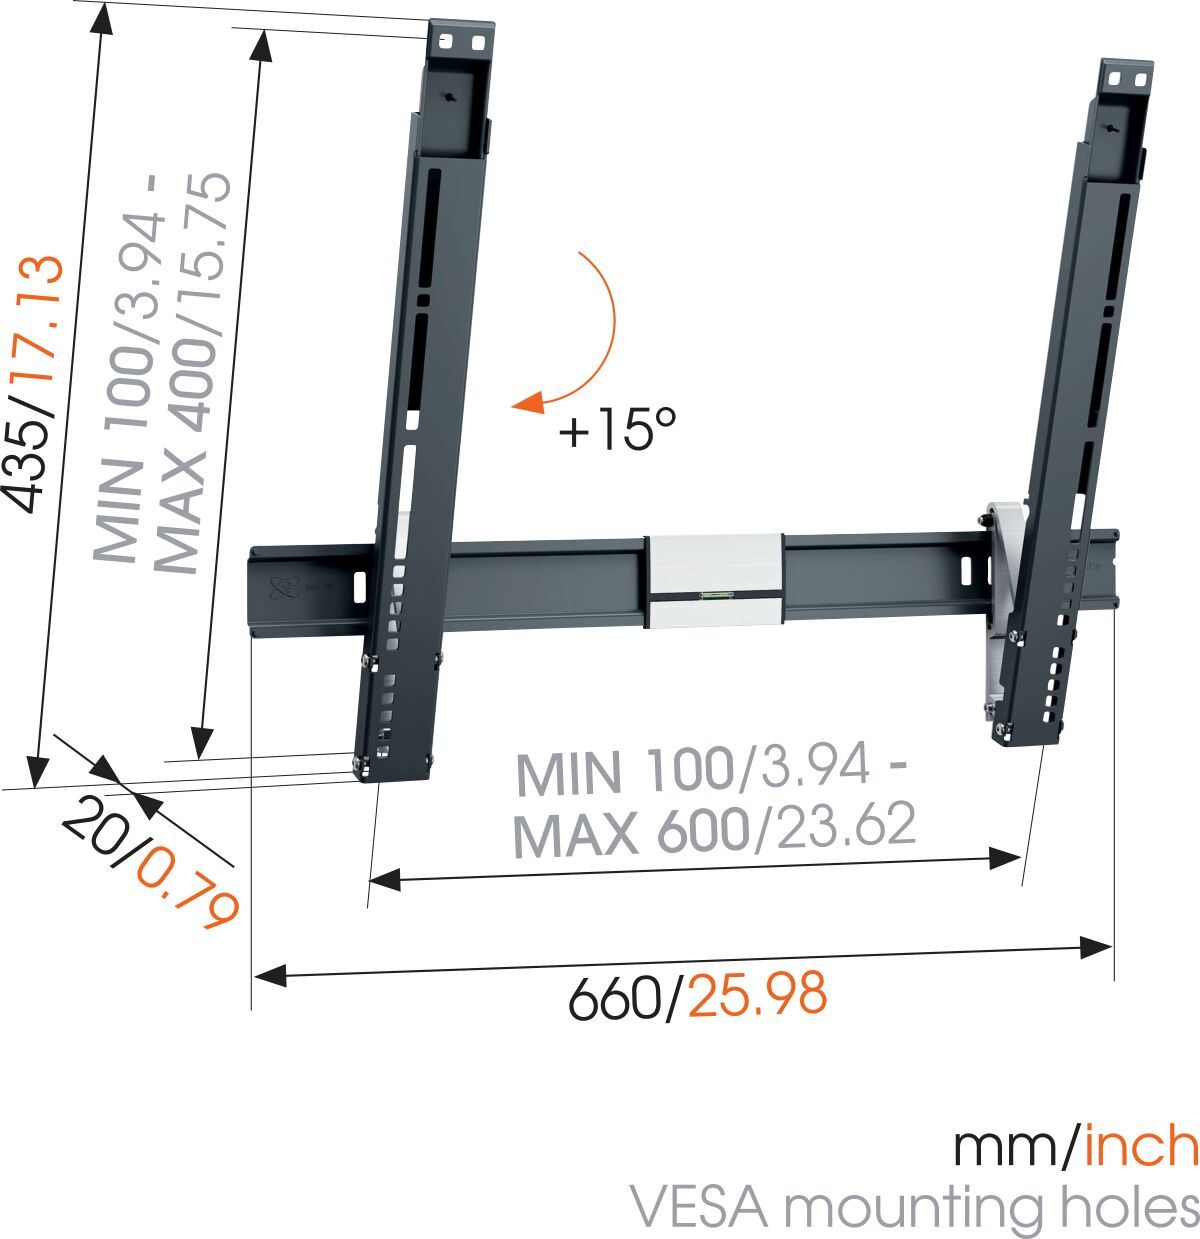 Vogel's THIN 515 ExtraThin Tilting TV Wall Mount - Suitable for 40 up to 65 inch TVs up to Tilt up to 15° - Dimensions